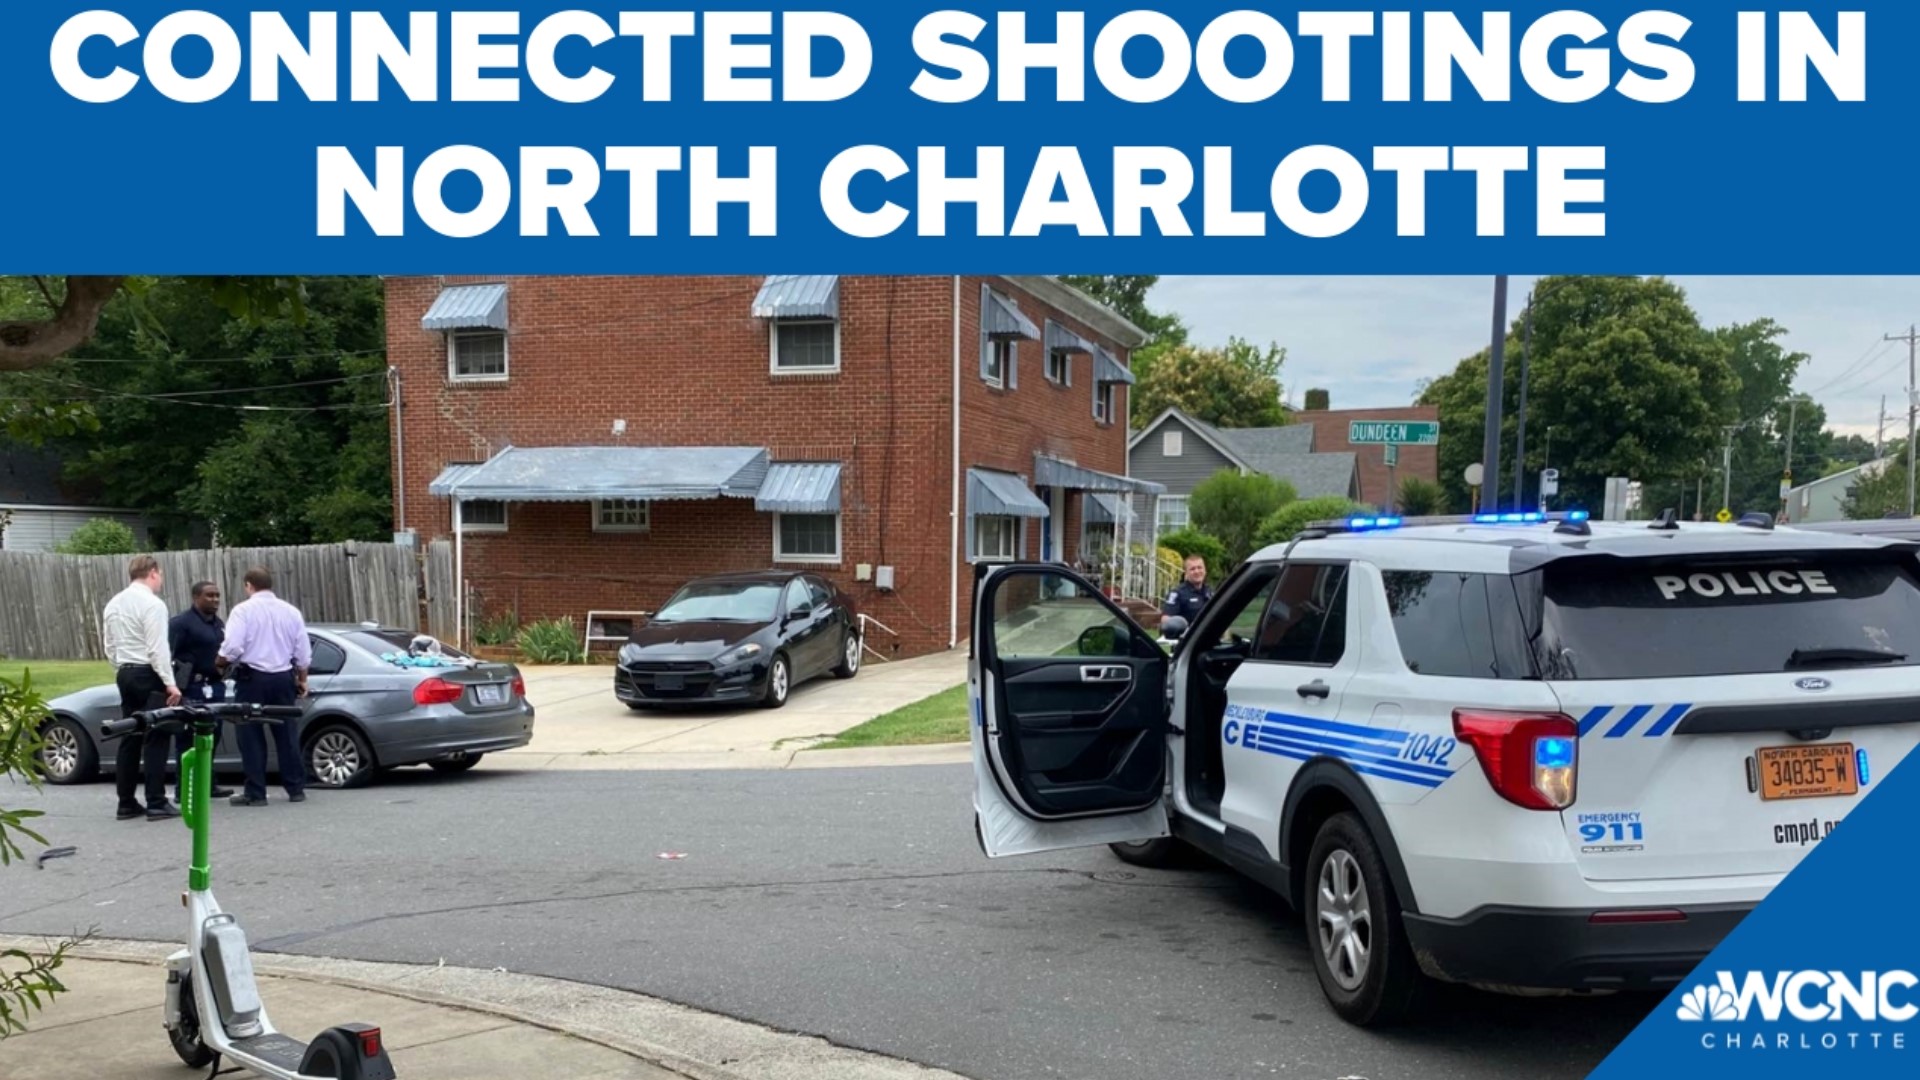 CMPD say shots rang out on Holly Street in west Charlotte. At least five people were hurt including a child. Police say the victims knew the suspected shooter.